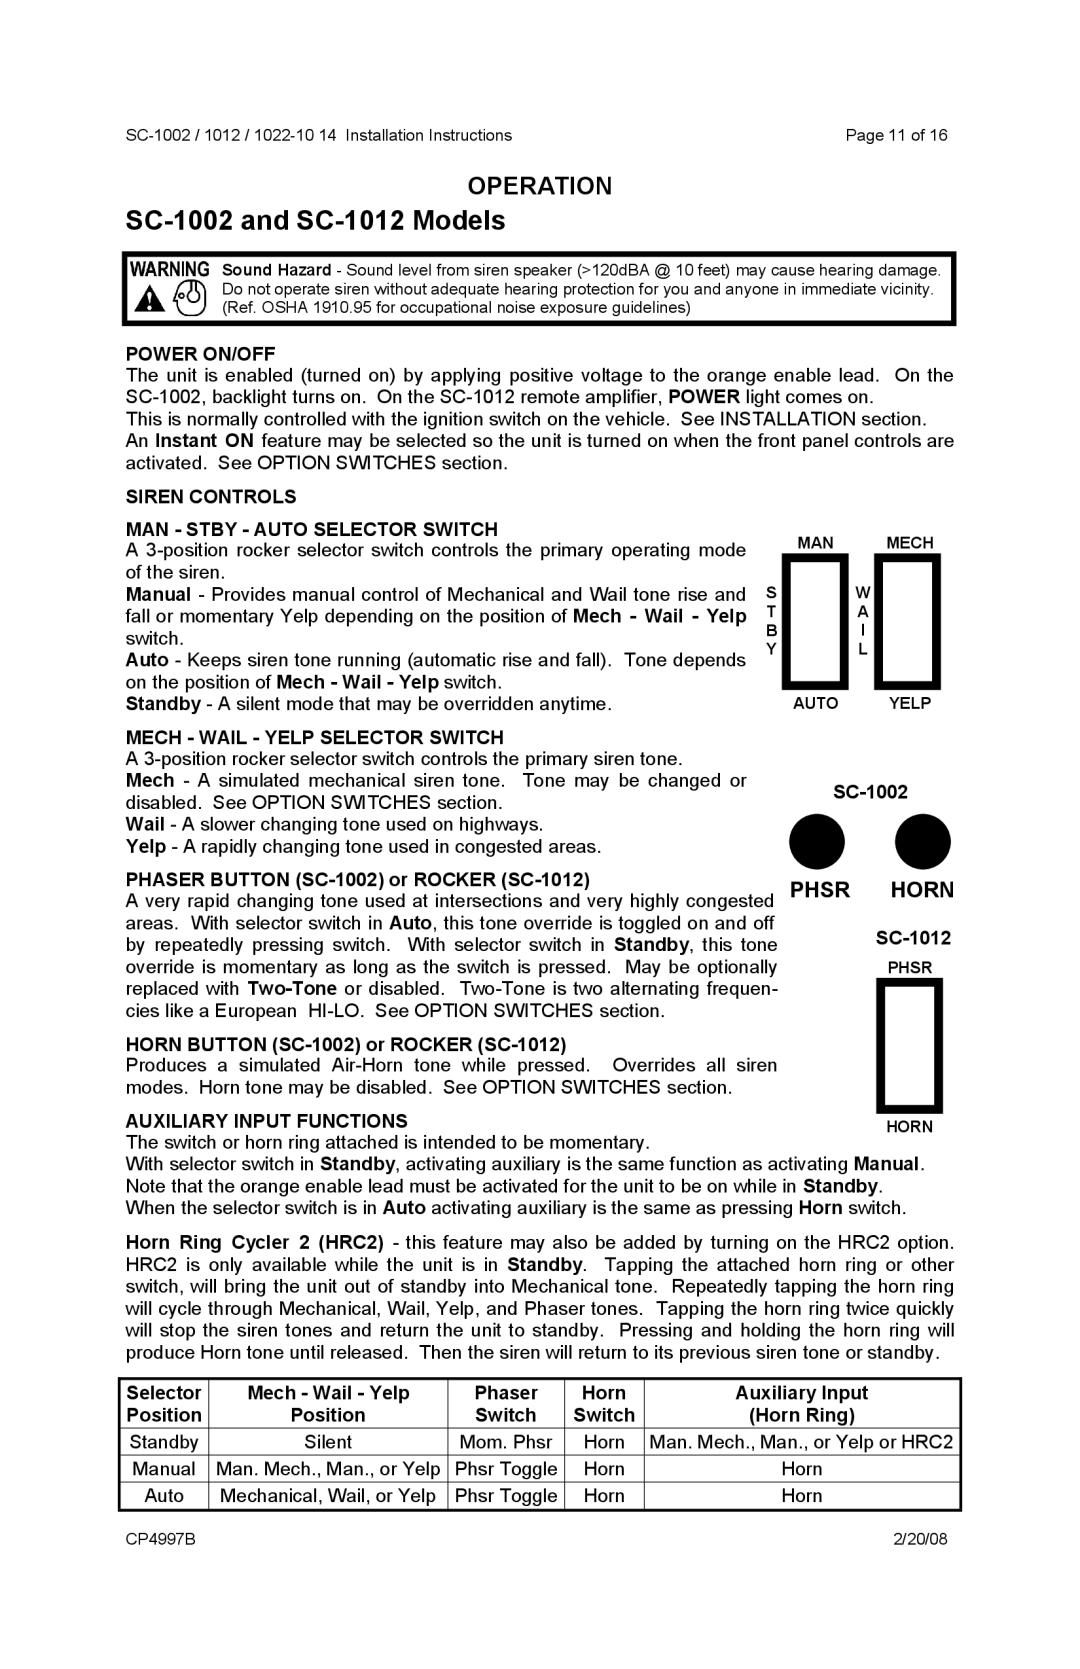 Carson 1022-10 operating instructions SC-1002 and SC-1012 Models, Operation, Phsr Horn 